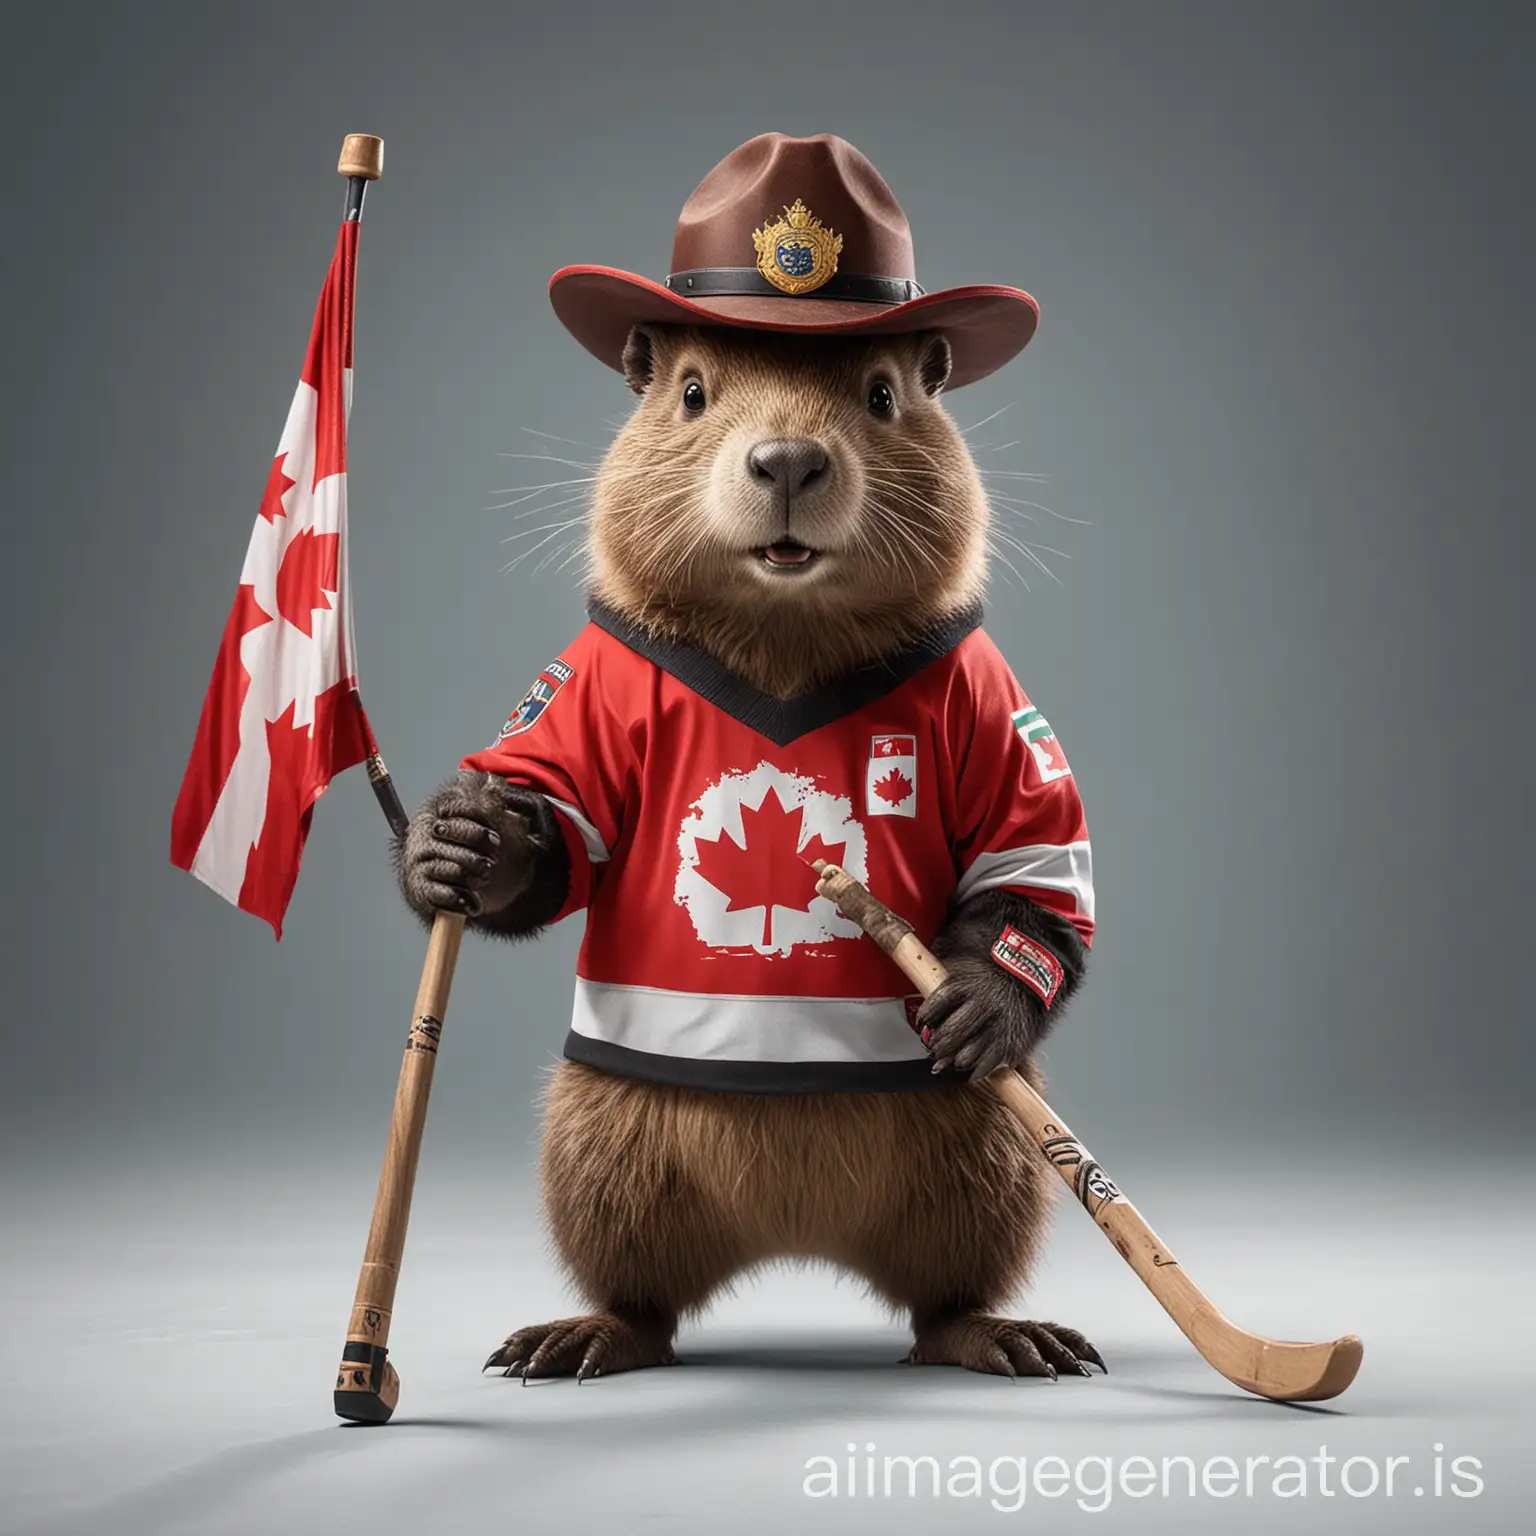 Beaver wearing a Canadian Mounted Police Hat, a Hockey jersey, holding a hockey stick in one hand with a Canadian flag attached to the top